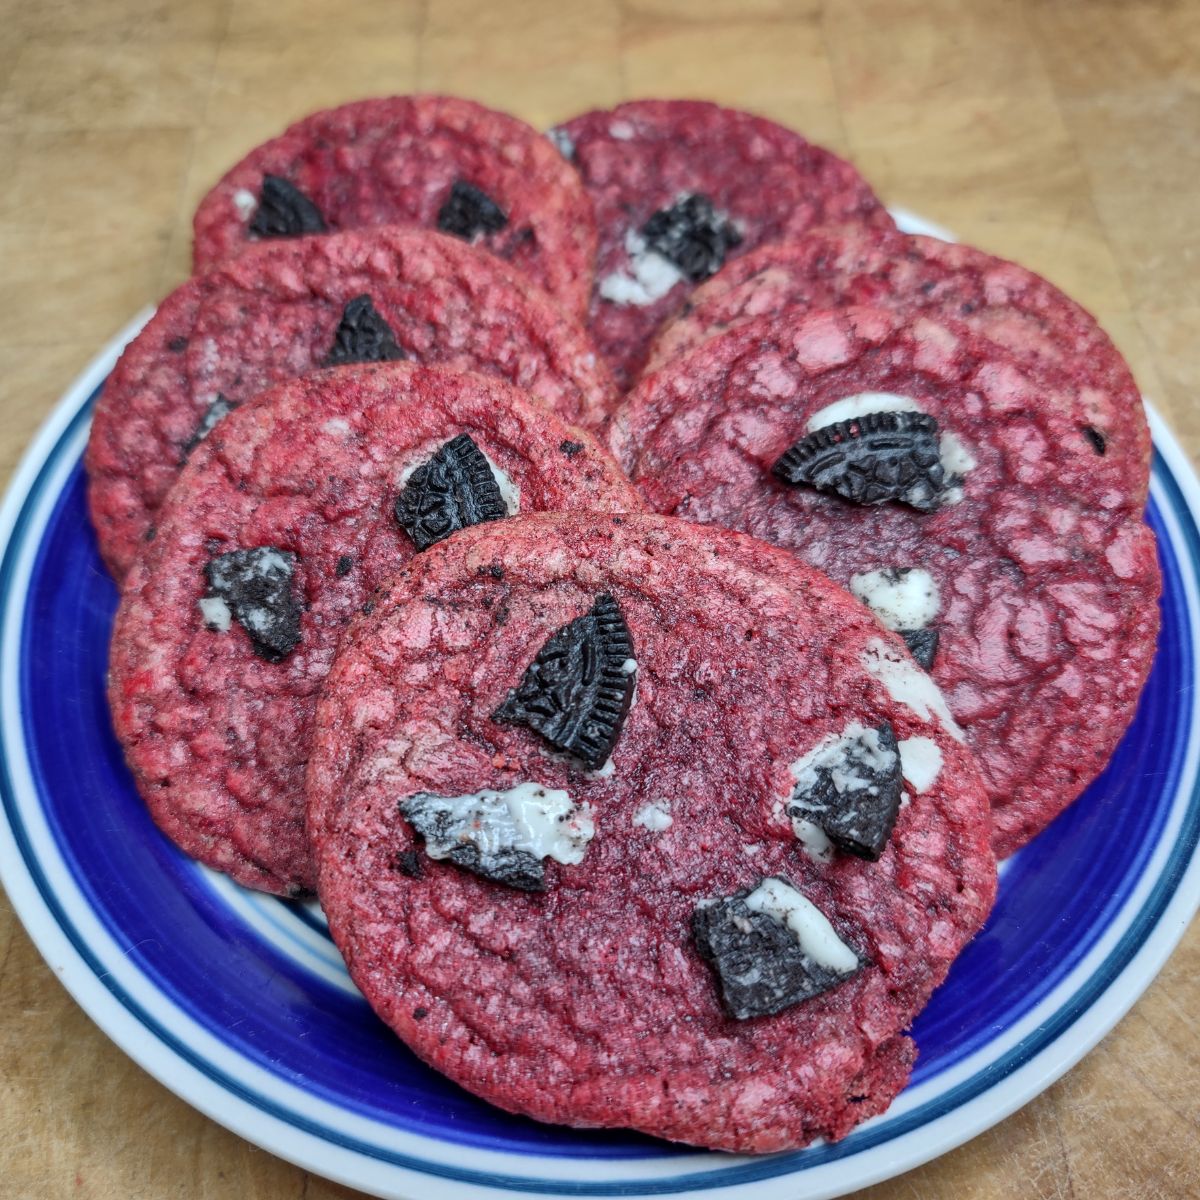 Oreo red velvet cookies on a plate.